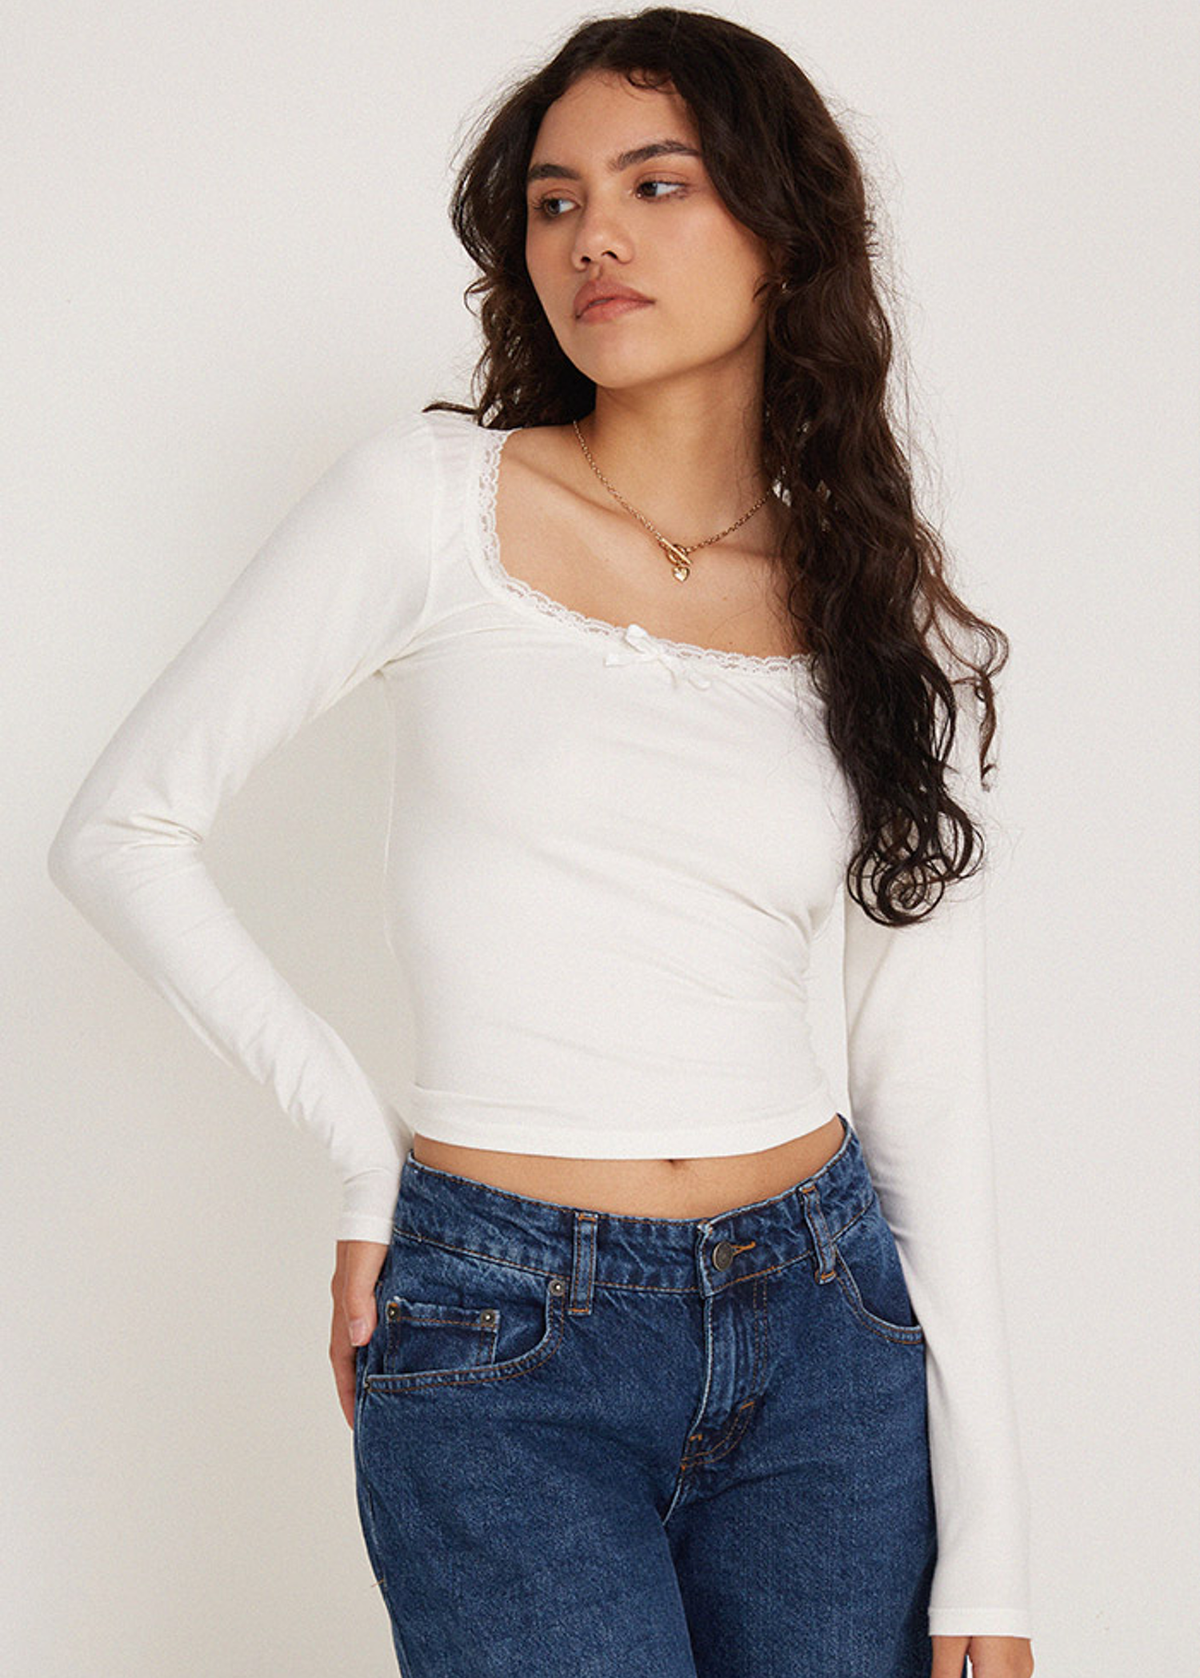 90s inspired white stretch cotton long sleeve tee with scoop neckline and lace and bow trim at neckline. by Motel Rocks